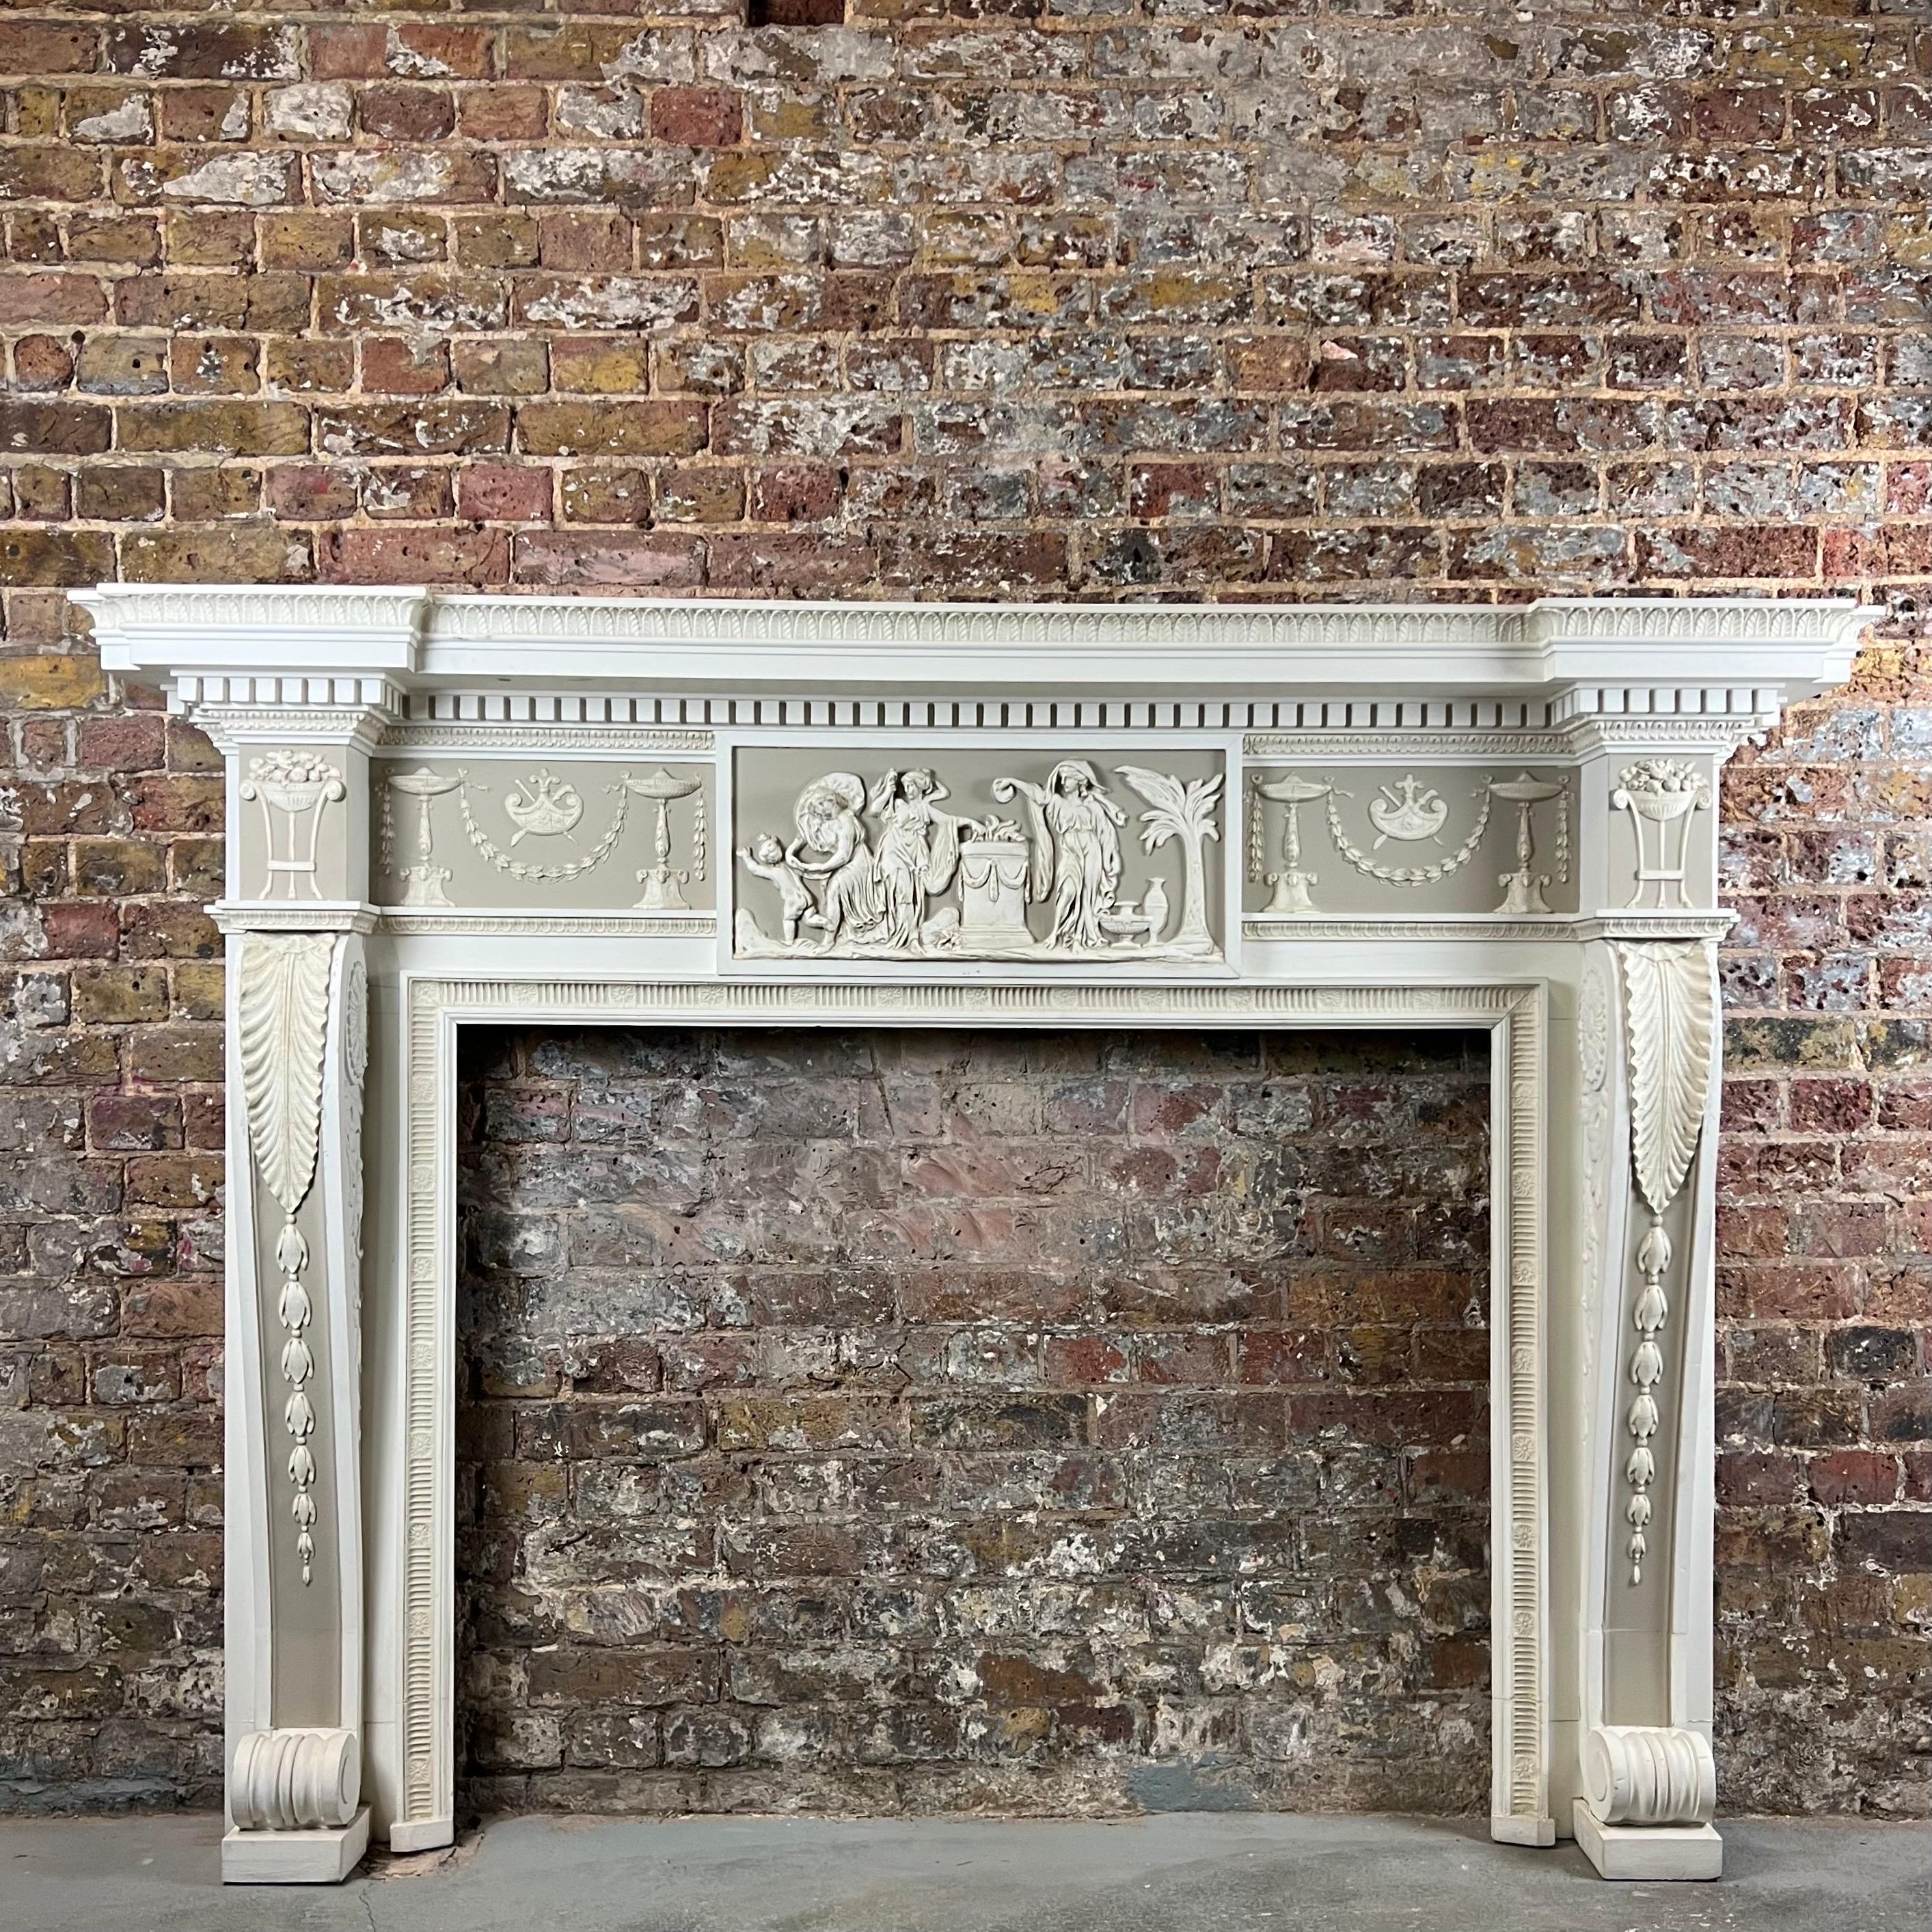 19th Century Timber Fireplace Mantlepiece George Jackson and Sons. Ltd.
A unique and rare large antique chimney piece made in wood with fine Carton-Pierre decoration, attributed and authenticated to and by George Jackson and Sons Ltd. London. 

This